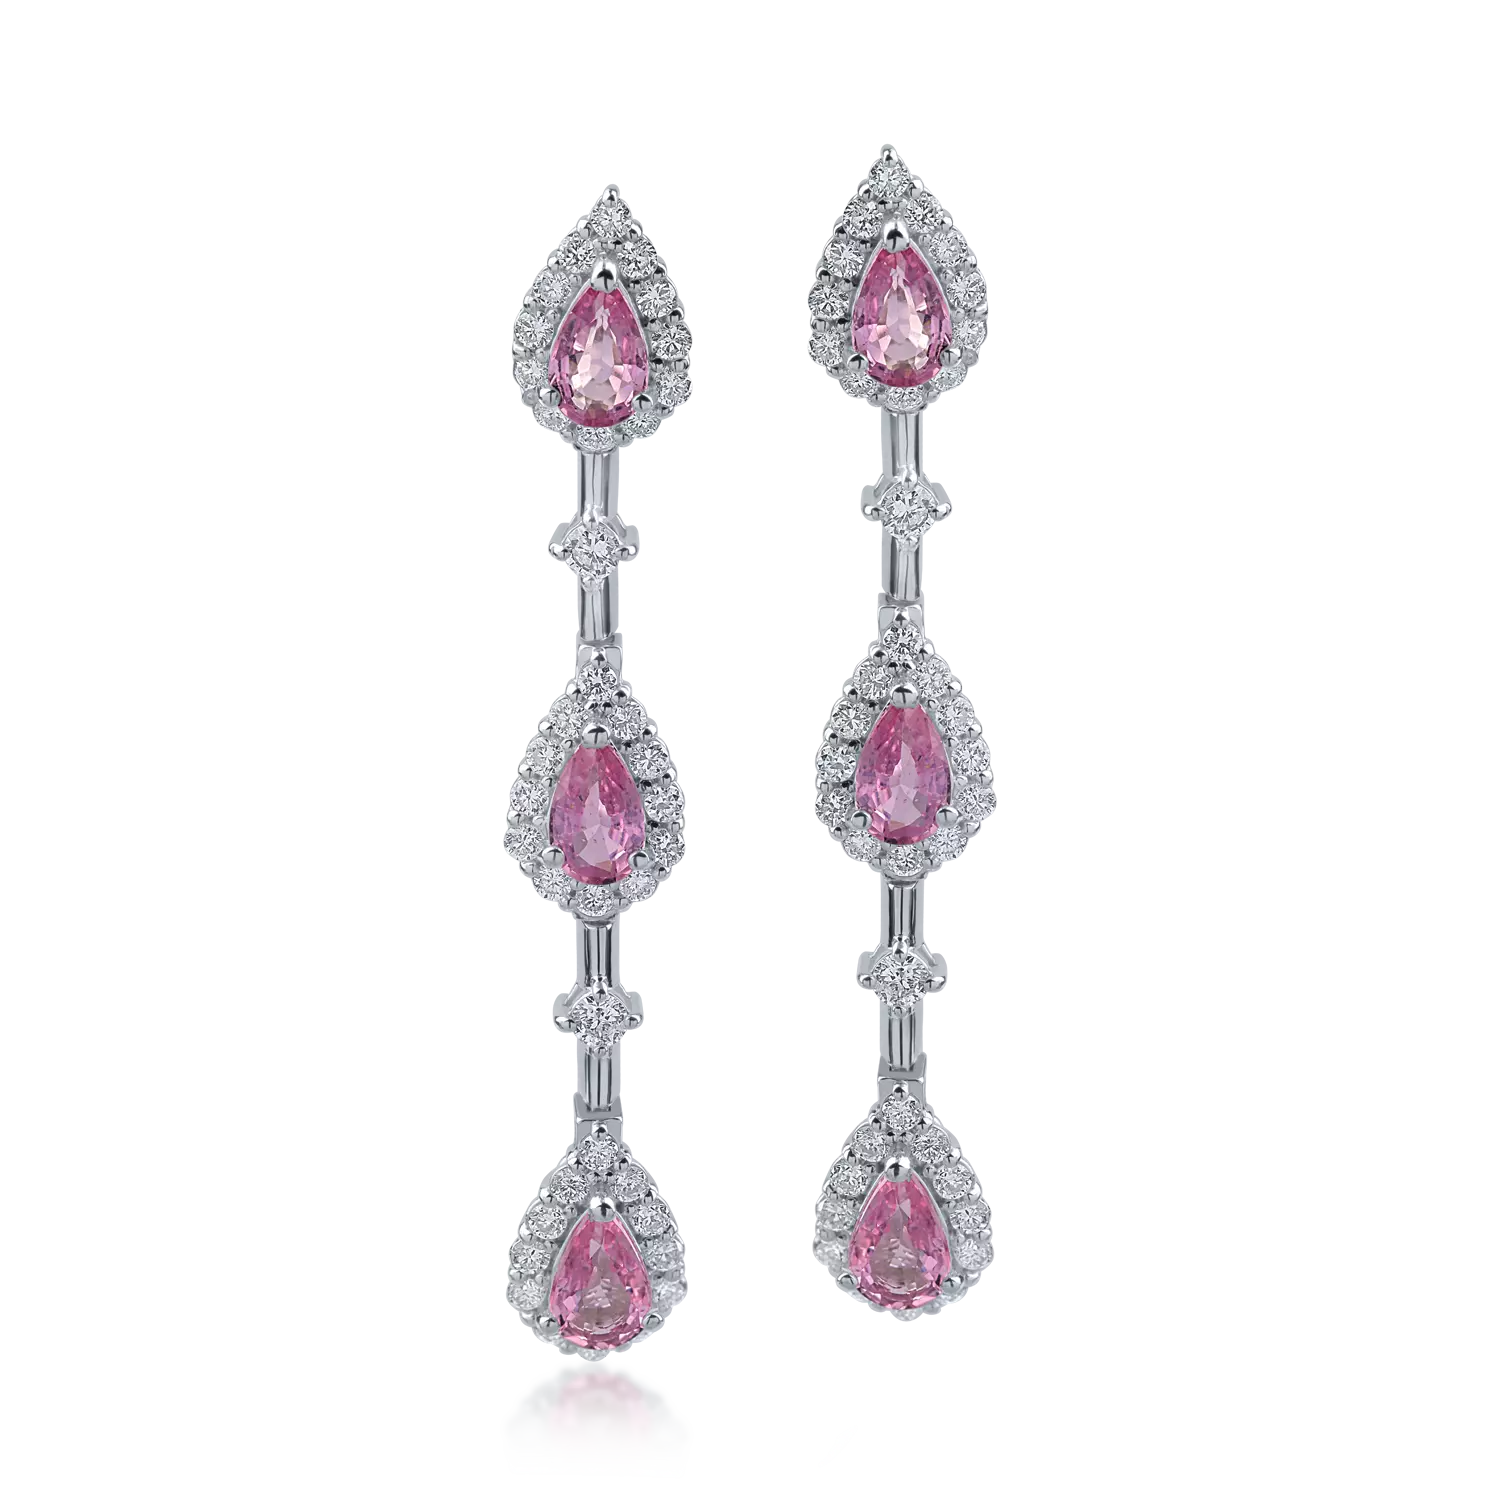 Platinum earrings with 1.38ct pink sapphires and 0.66ct diamonds